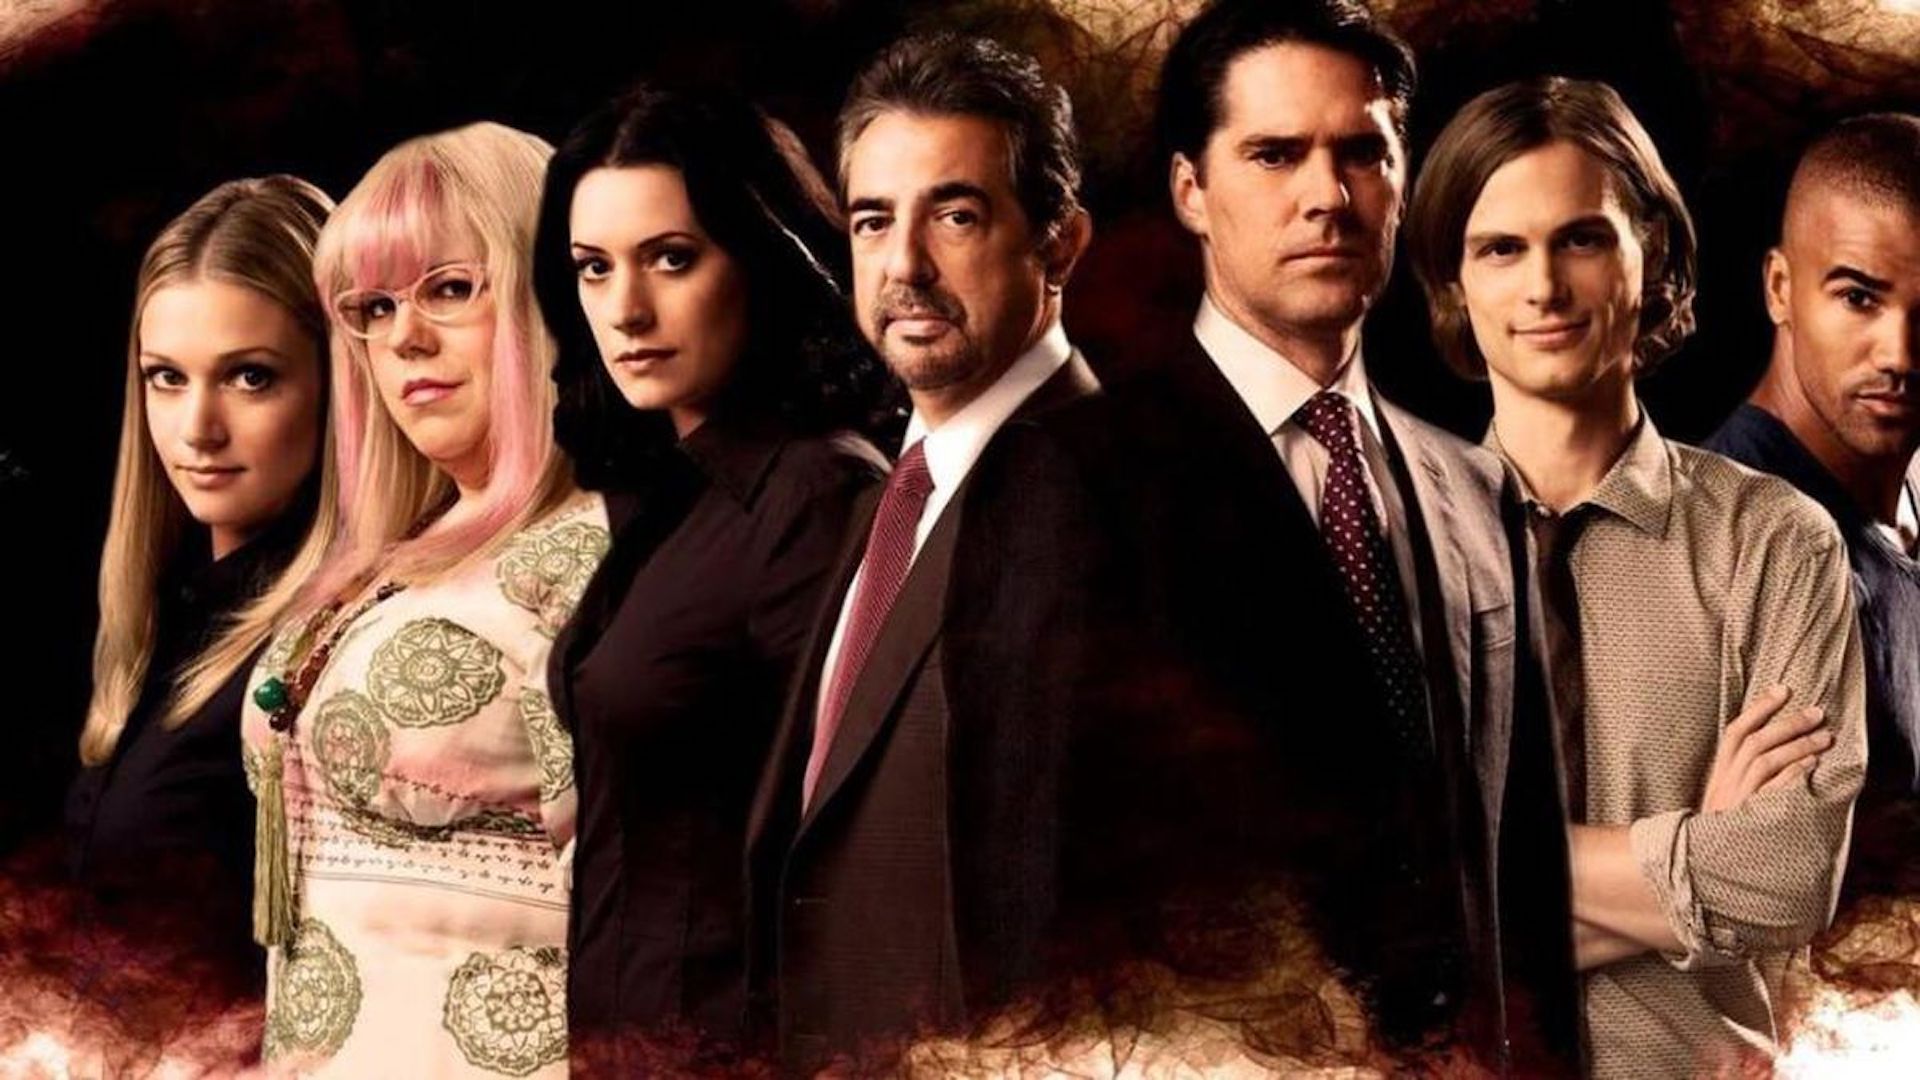 CBS's 'Criminal Minds' ended this year after 15 years. With plenty of seasons, what are the best episodes to binge watch? Read the list here.